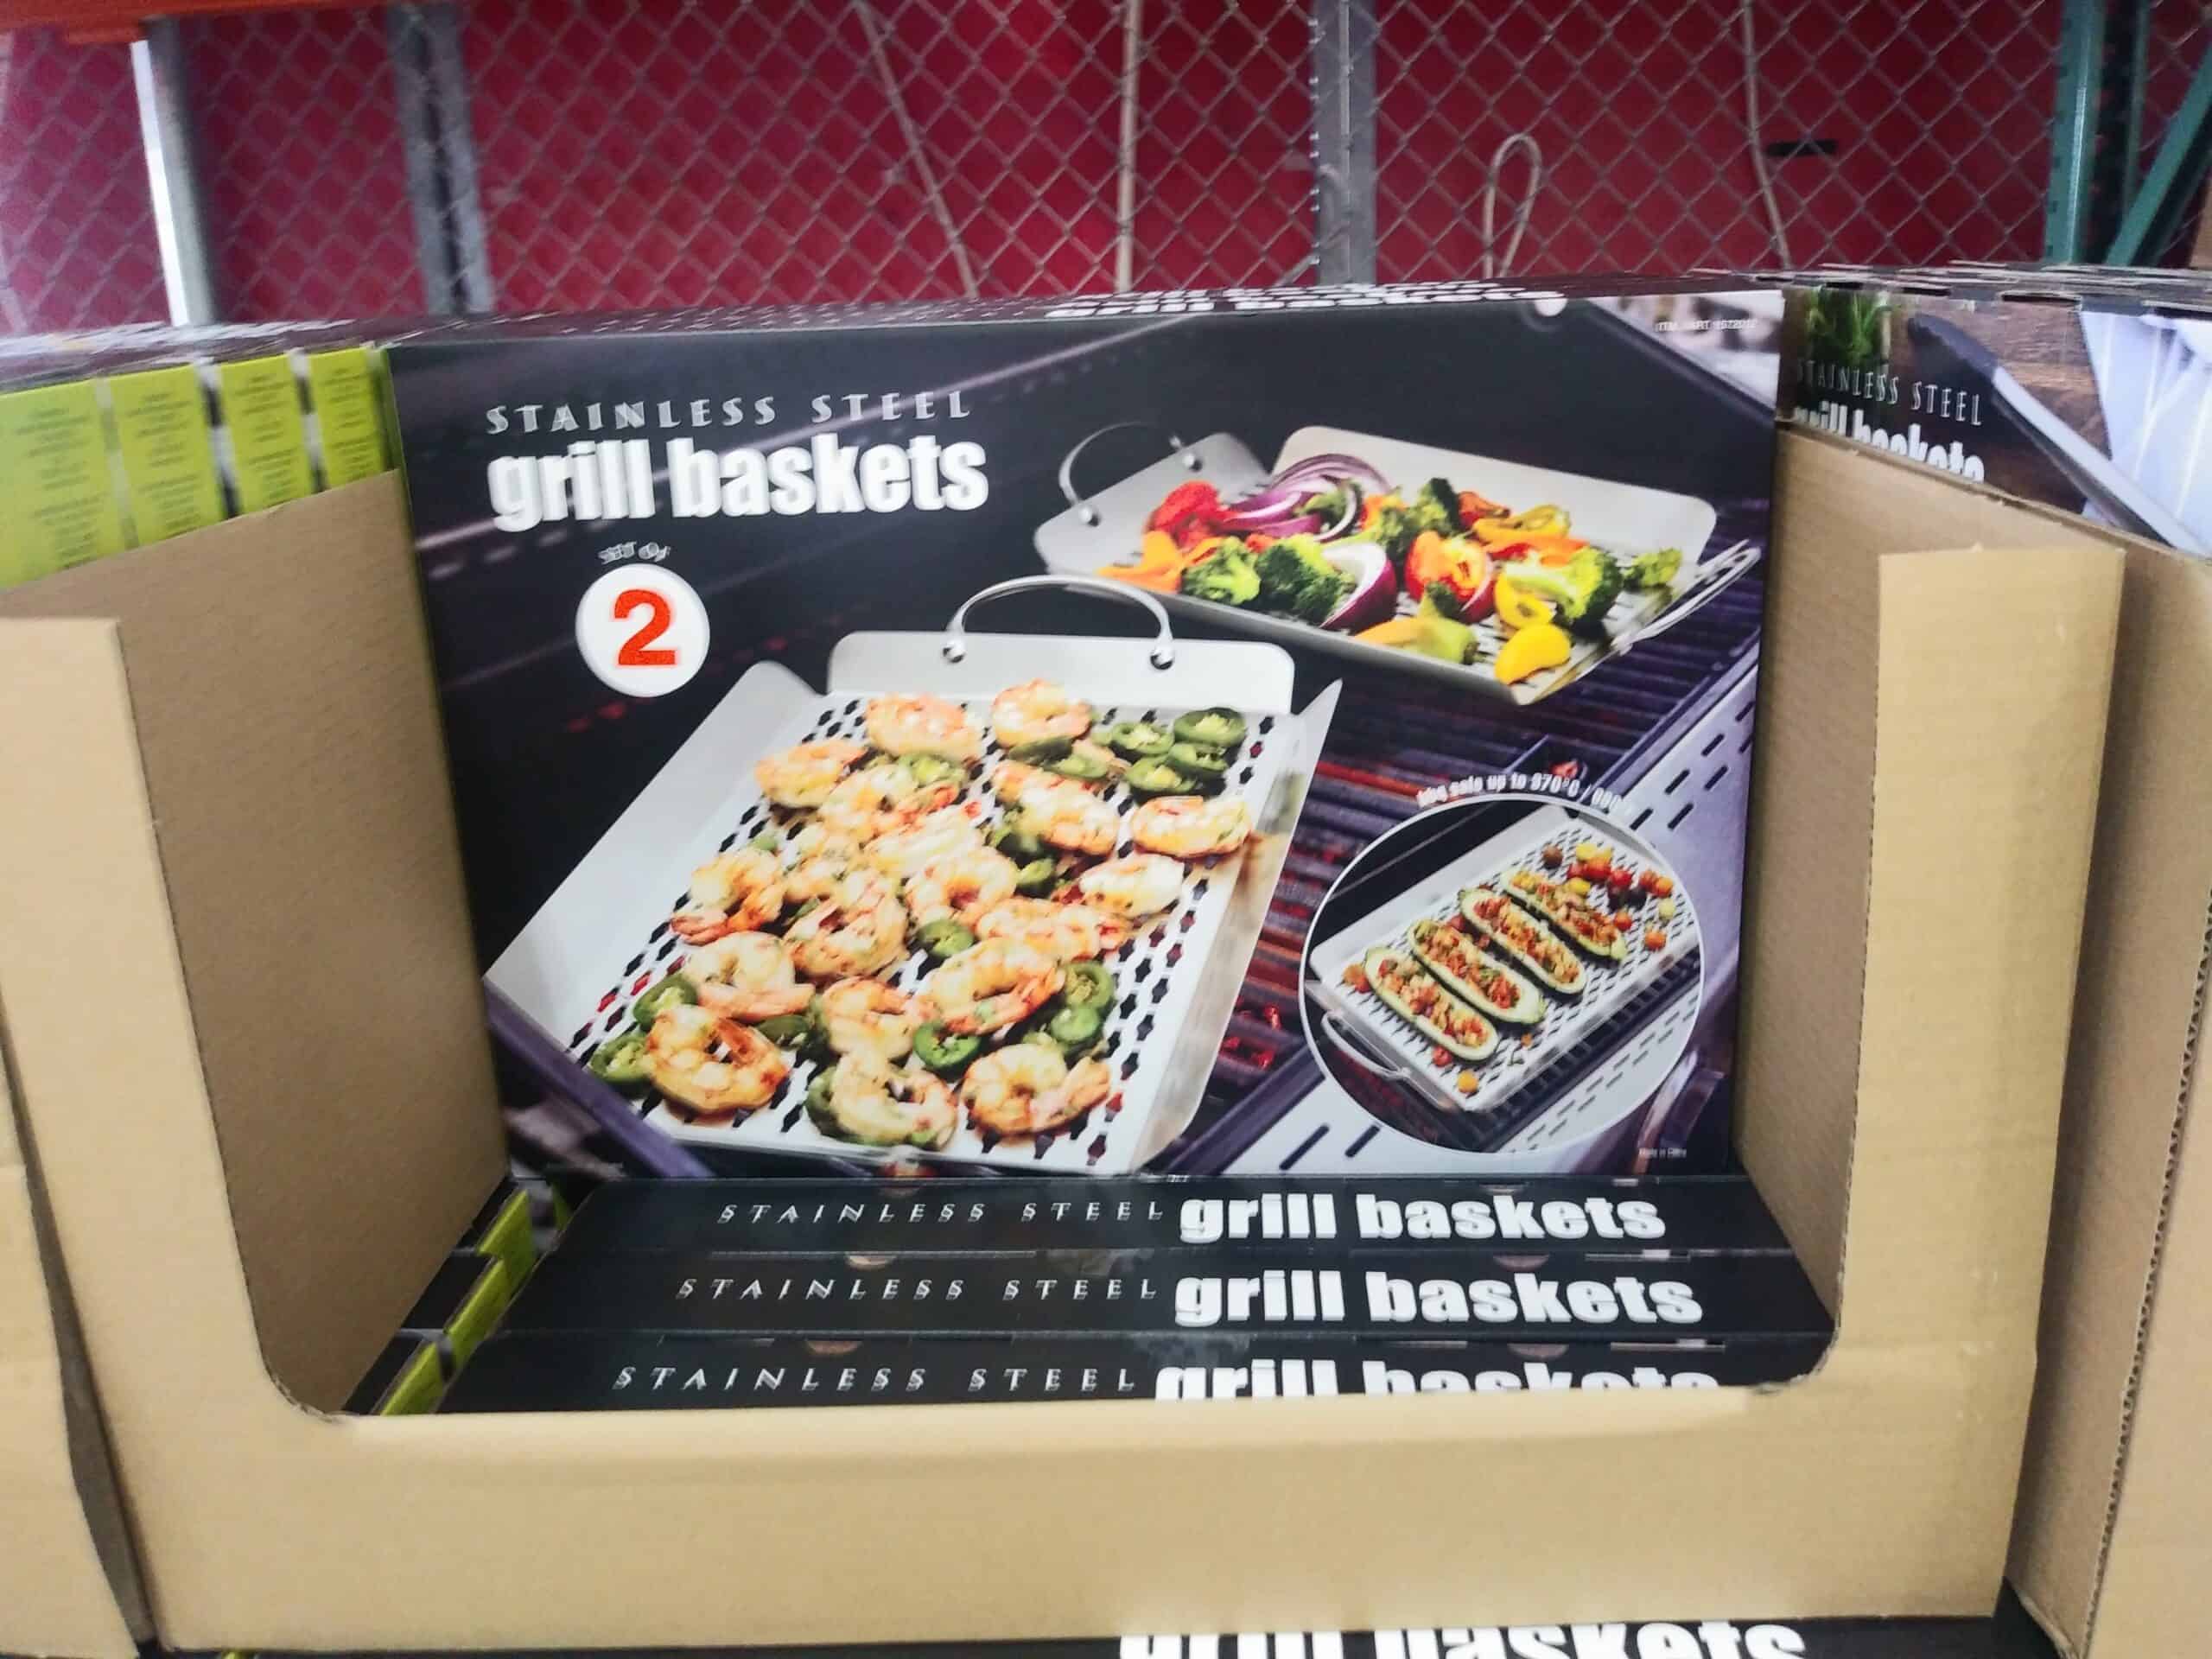 Stainless Steel Grill Baskets 2pk $16.99